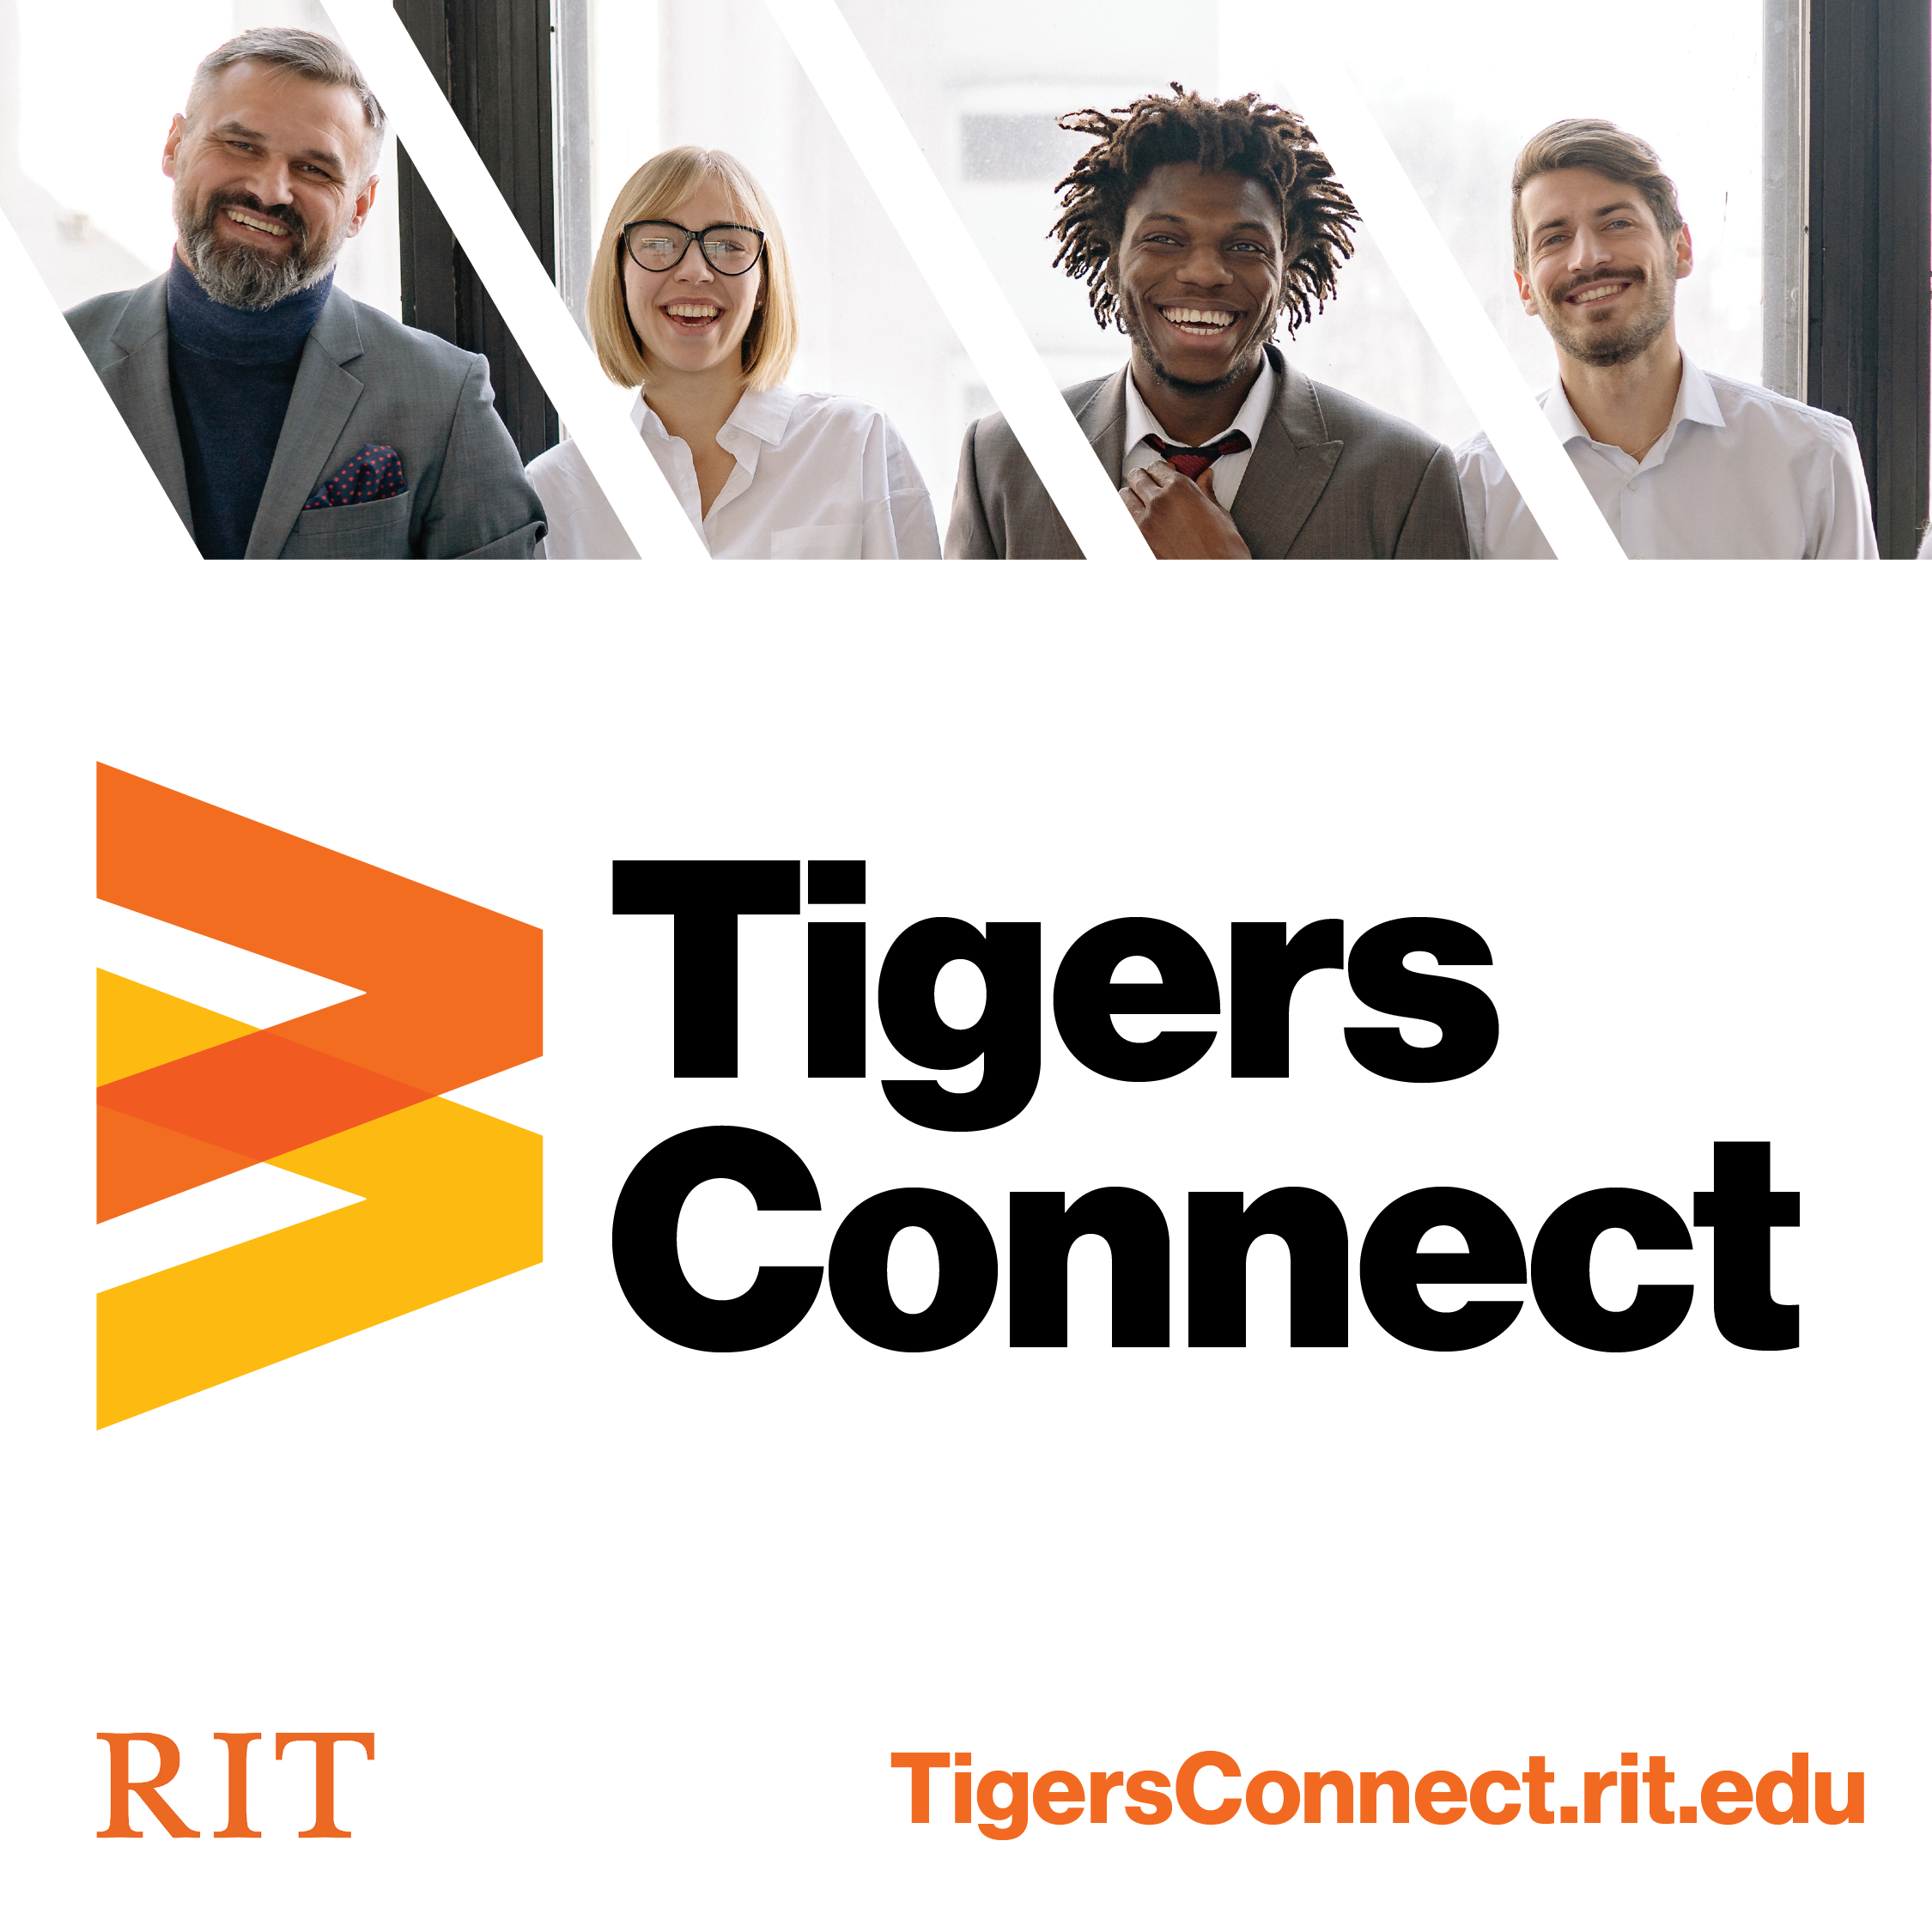 Tigers connect poster